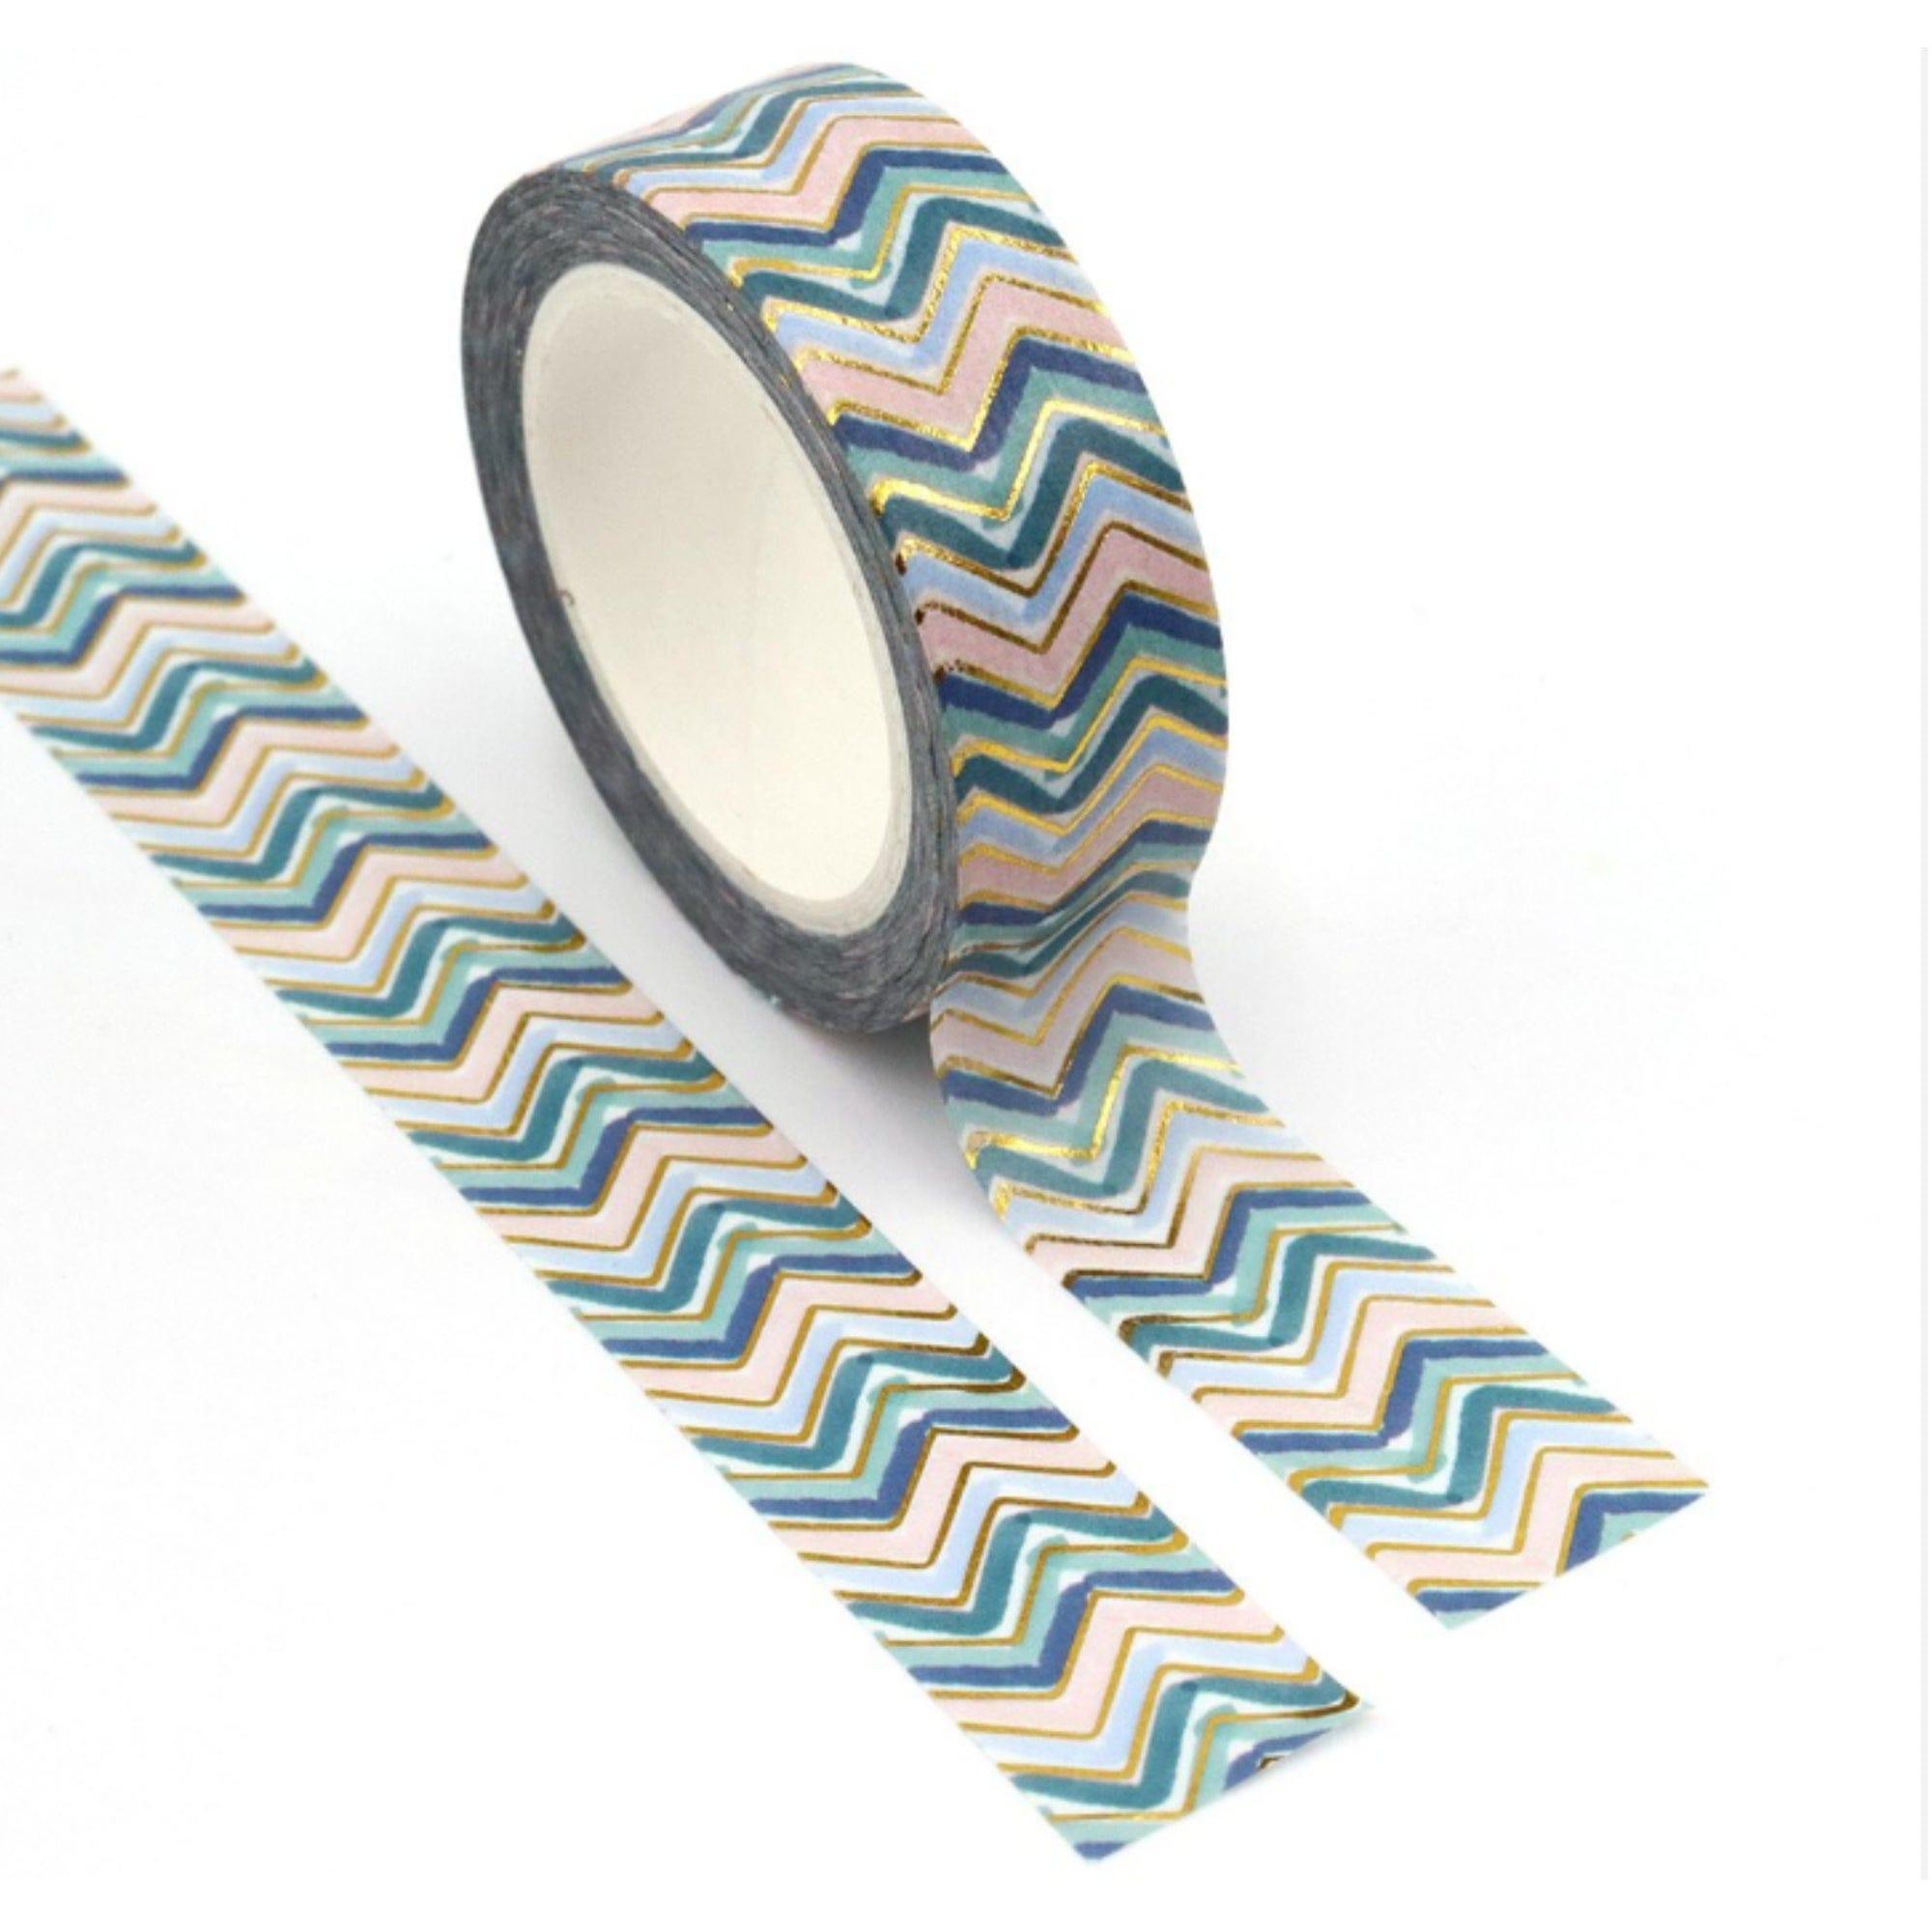 TW Collection Watercolor Chevron Gold Foiled Scrapbook Washi Tape by SSC Designs - 15mm x 30 Feet - Scrapbook Supply Companies